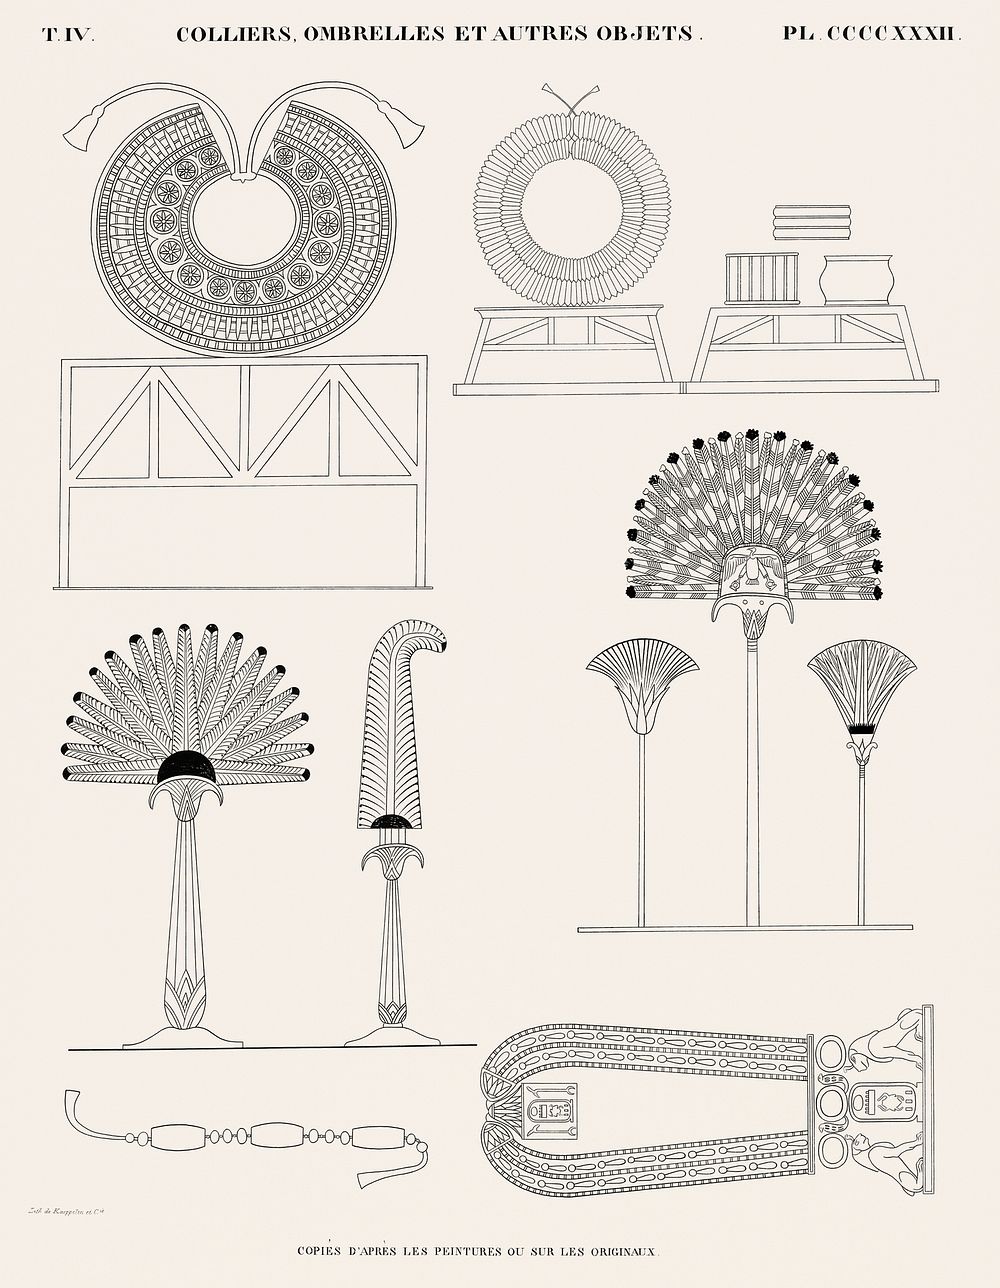 Necklaces, umbrellas and other objects copied from the paintings or the originals from Monuments de l'&Eacute;gypte et de la…